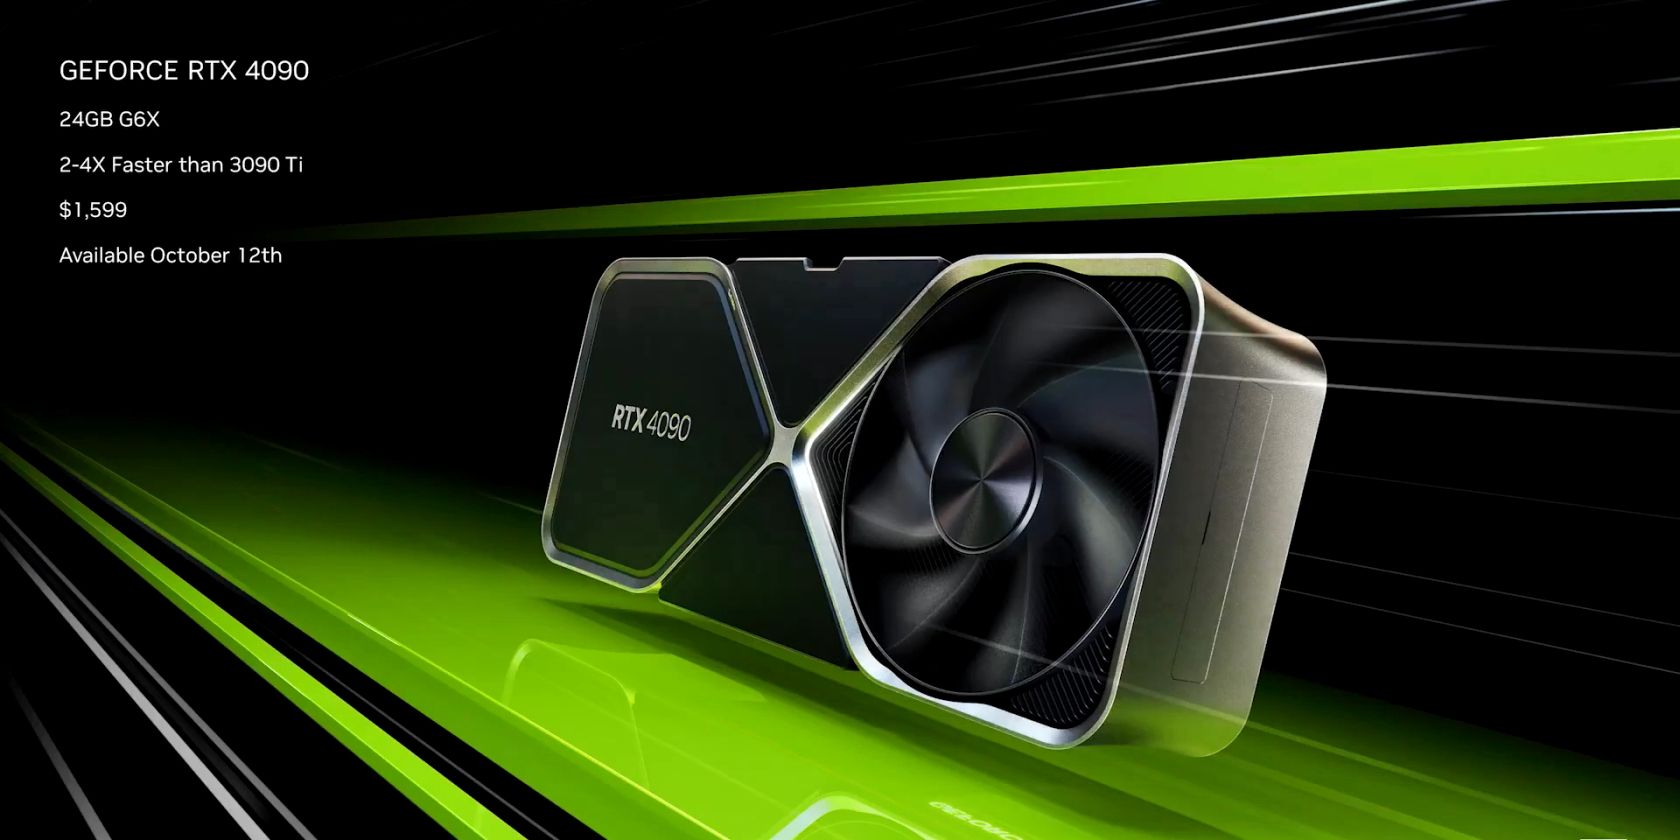 NVIDIA RTX 4090 GPU launch image with GPU and specifications on green and black background